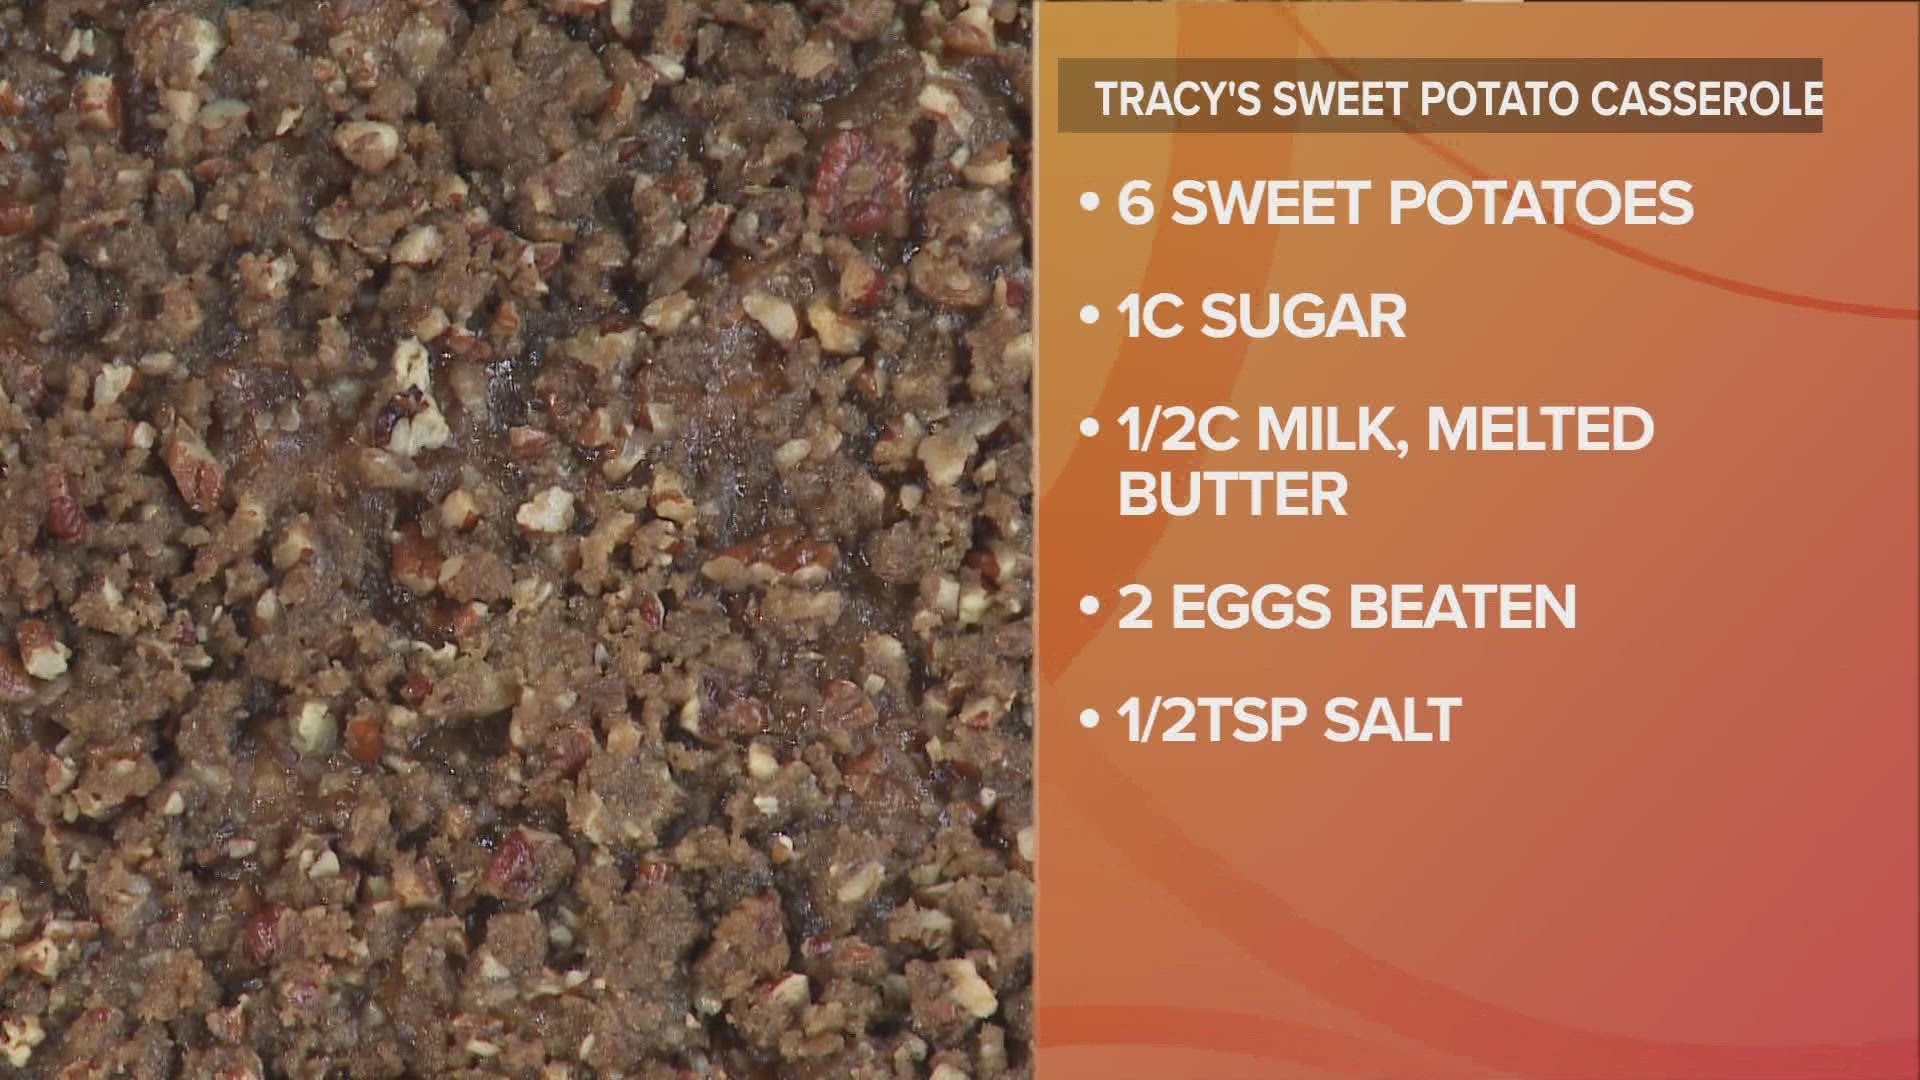 With Thanksgiving approaching, Jay Crawford's wife, Tracy, shows us how to make her sweet potato casserole.